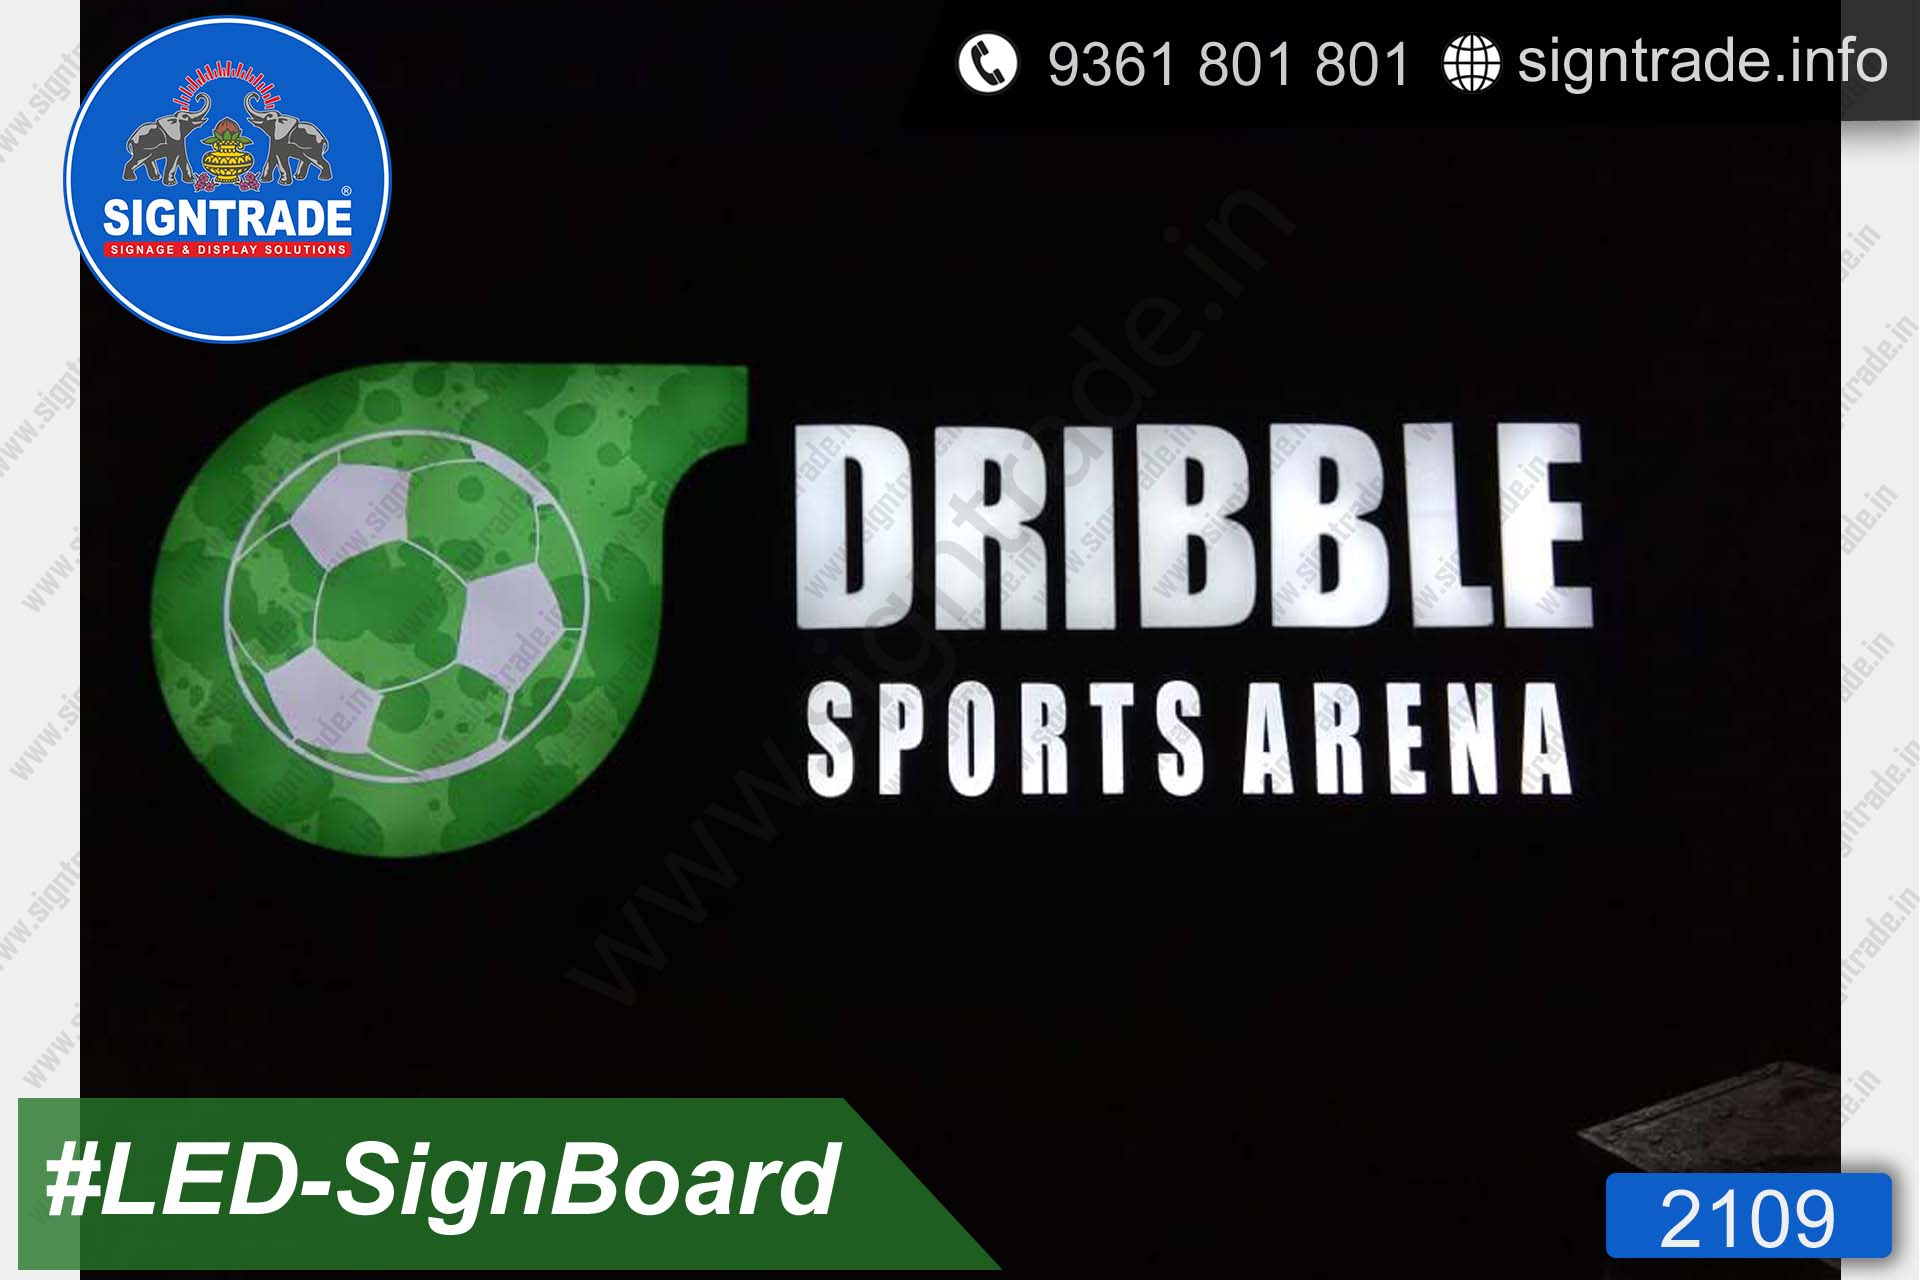 Dribble sports arena